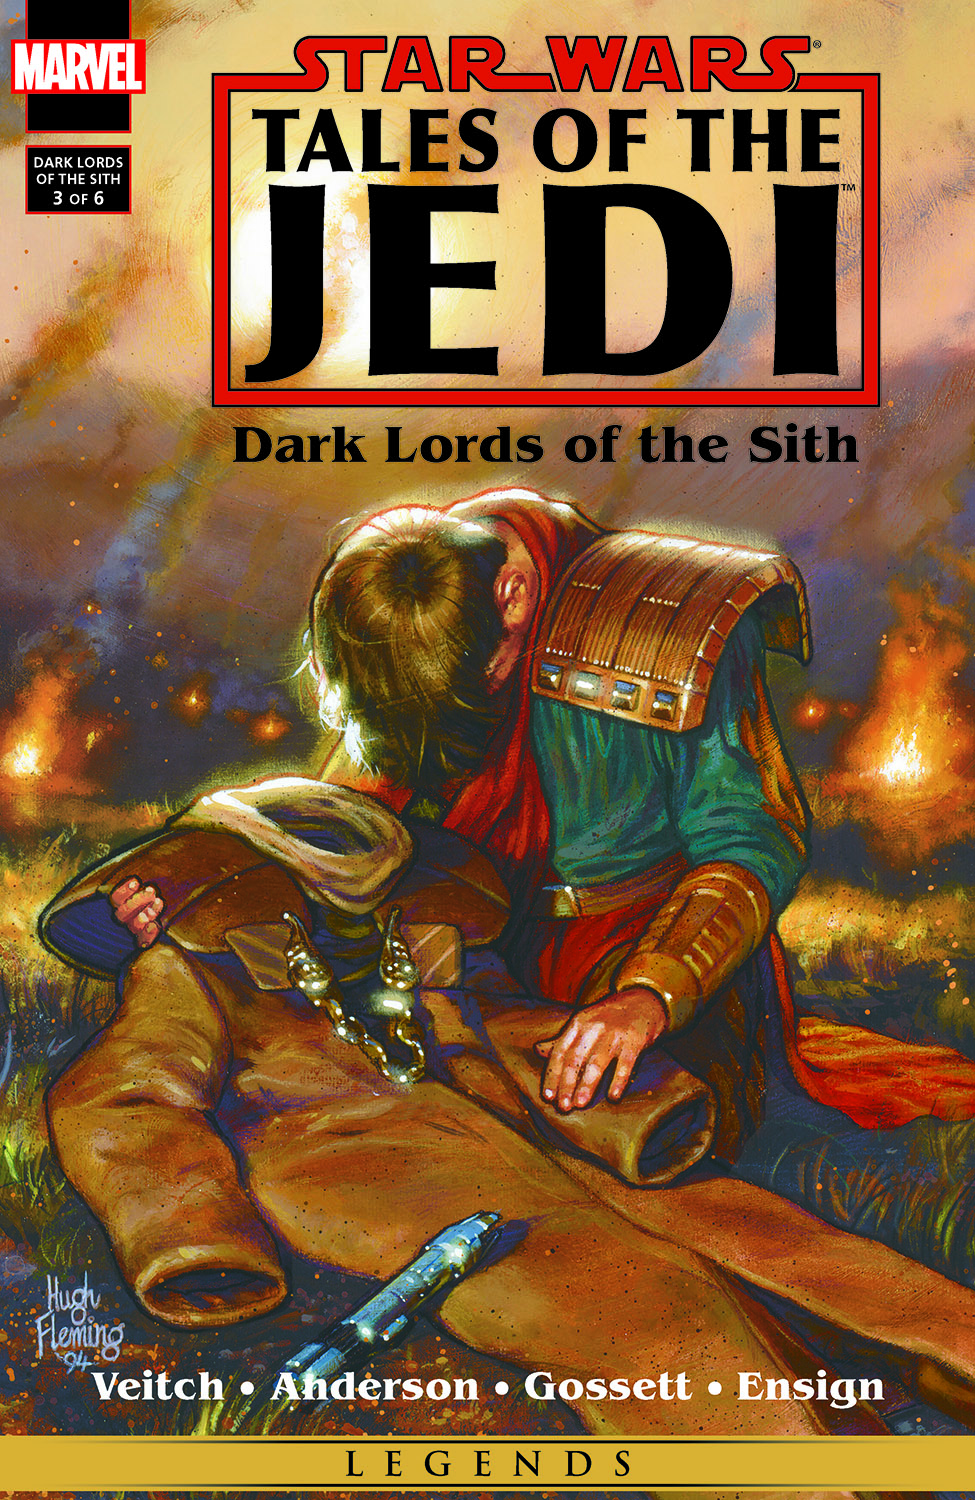 Star Wars: Tales of the Jedi - Dark Lords of the Sith (1994) #3